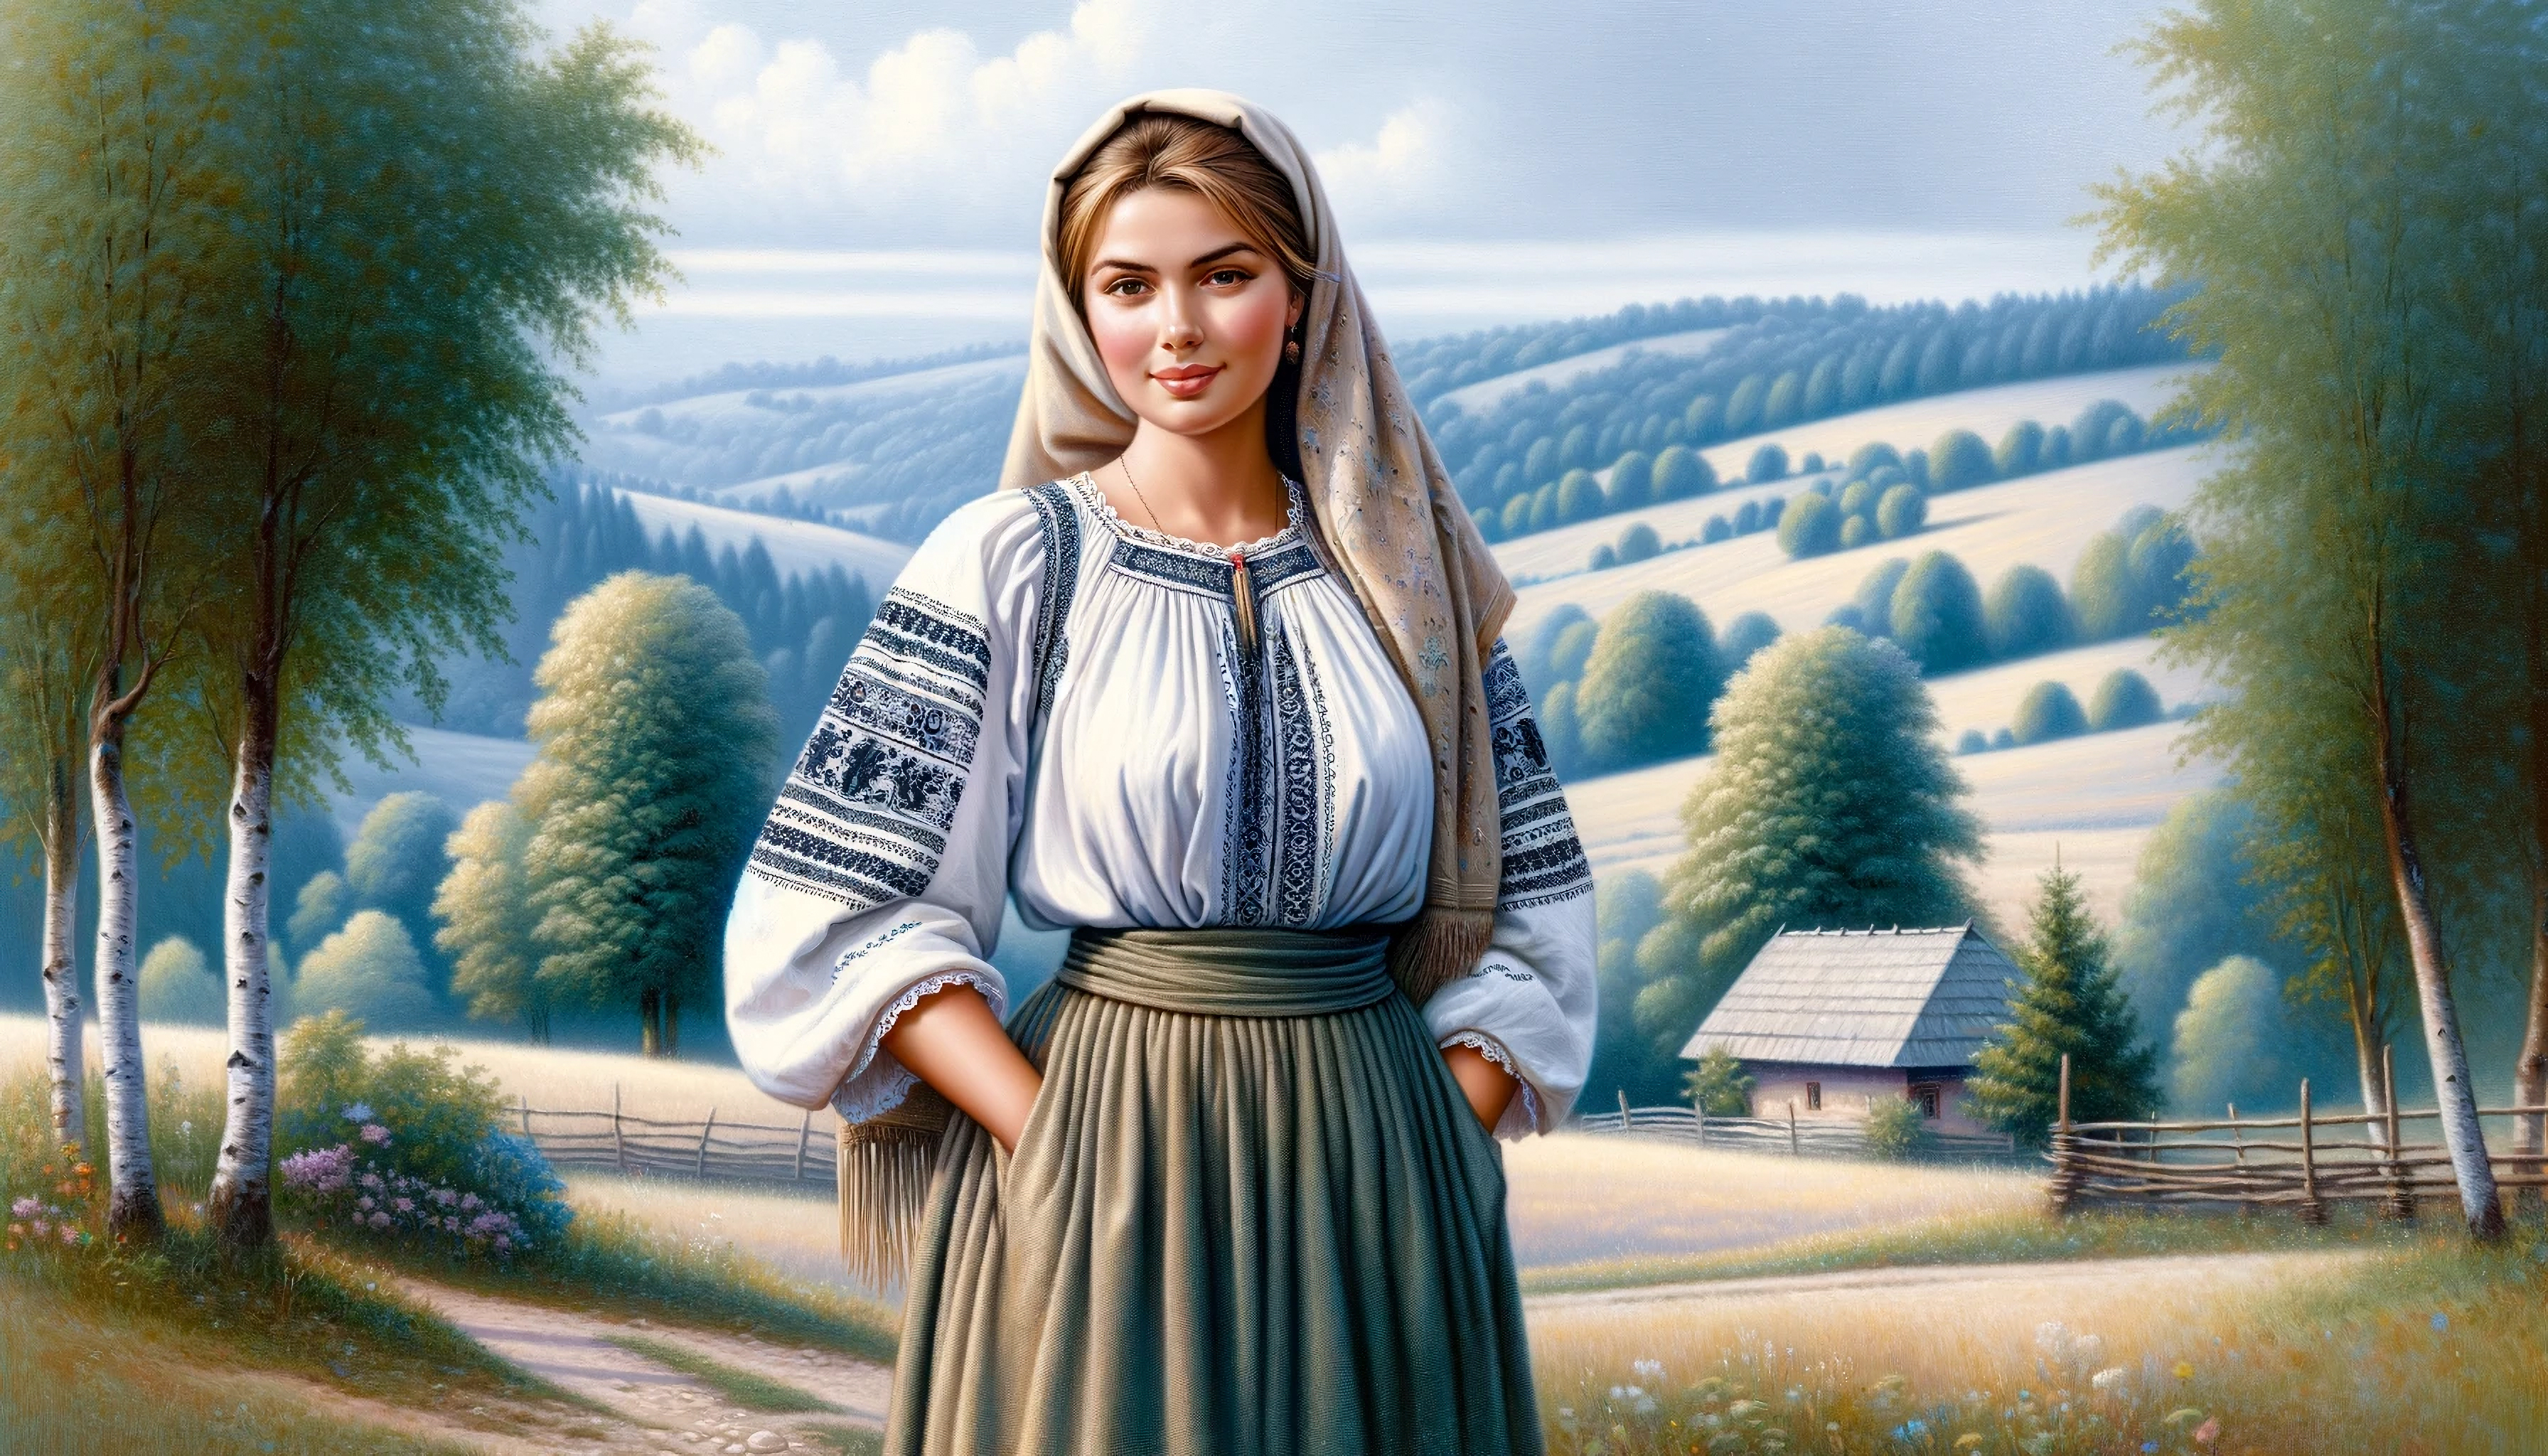 General 3584x2048 AI art digital art women outdoors portrait landscape women outdoors long hair closed mouth smiling looking at viewer standing hands in pockets scarf trees clouds flowers hills traditional clothing